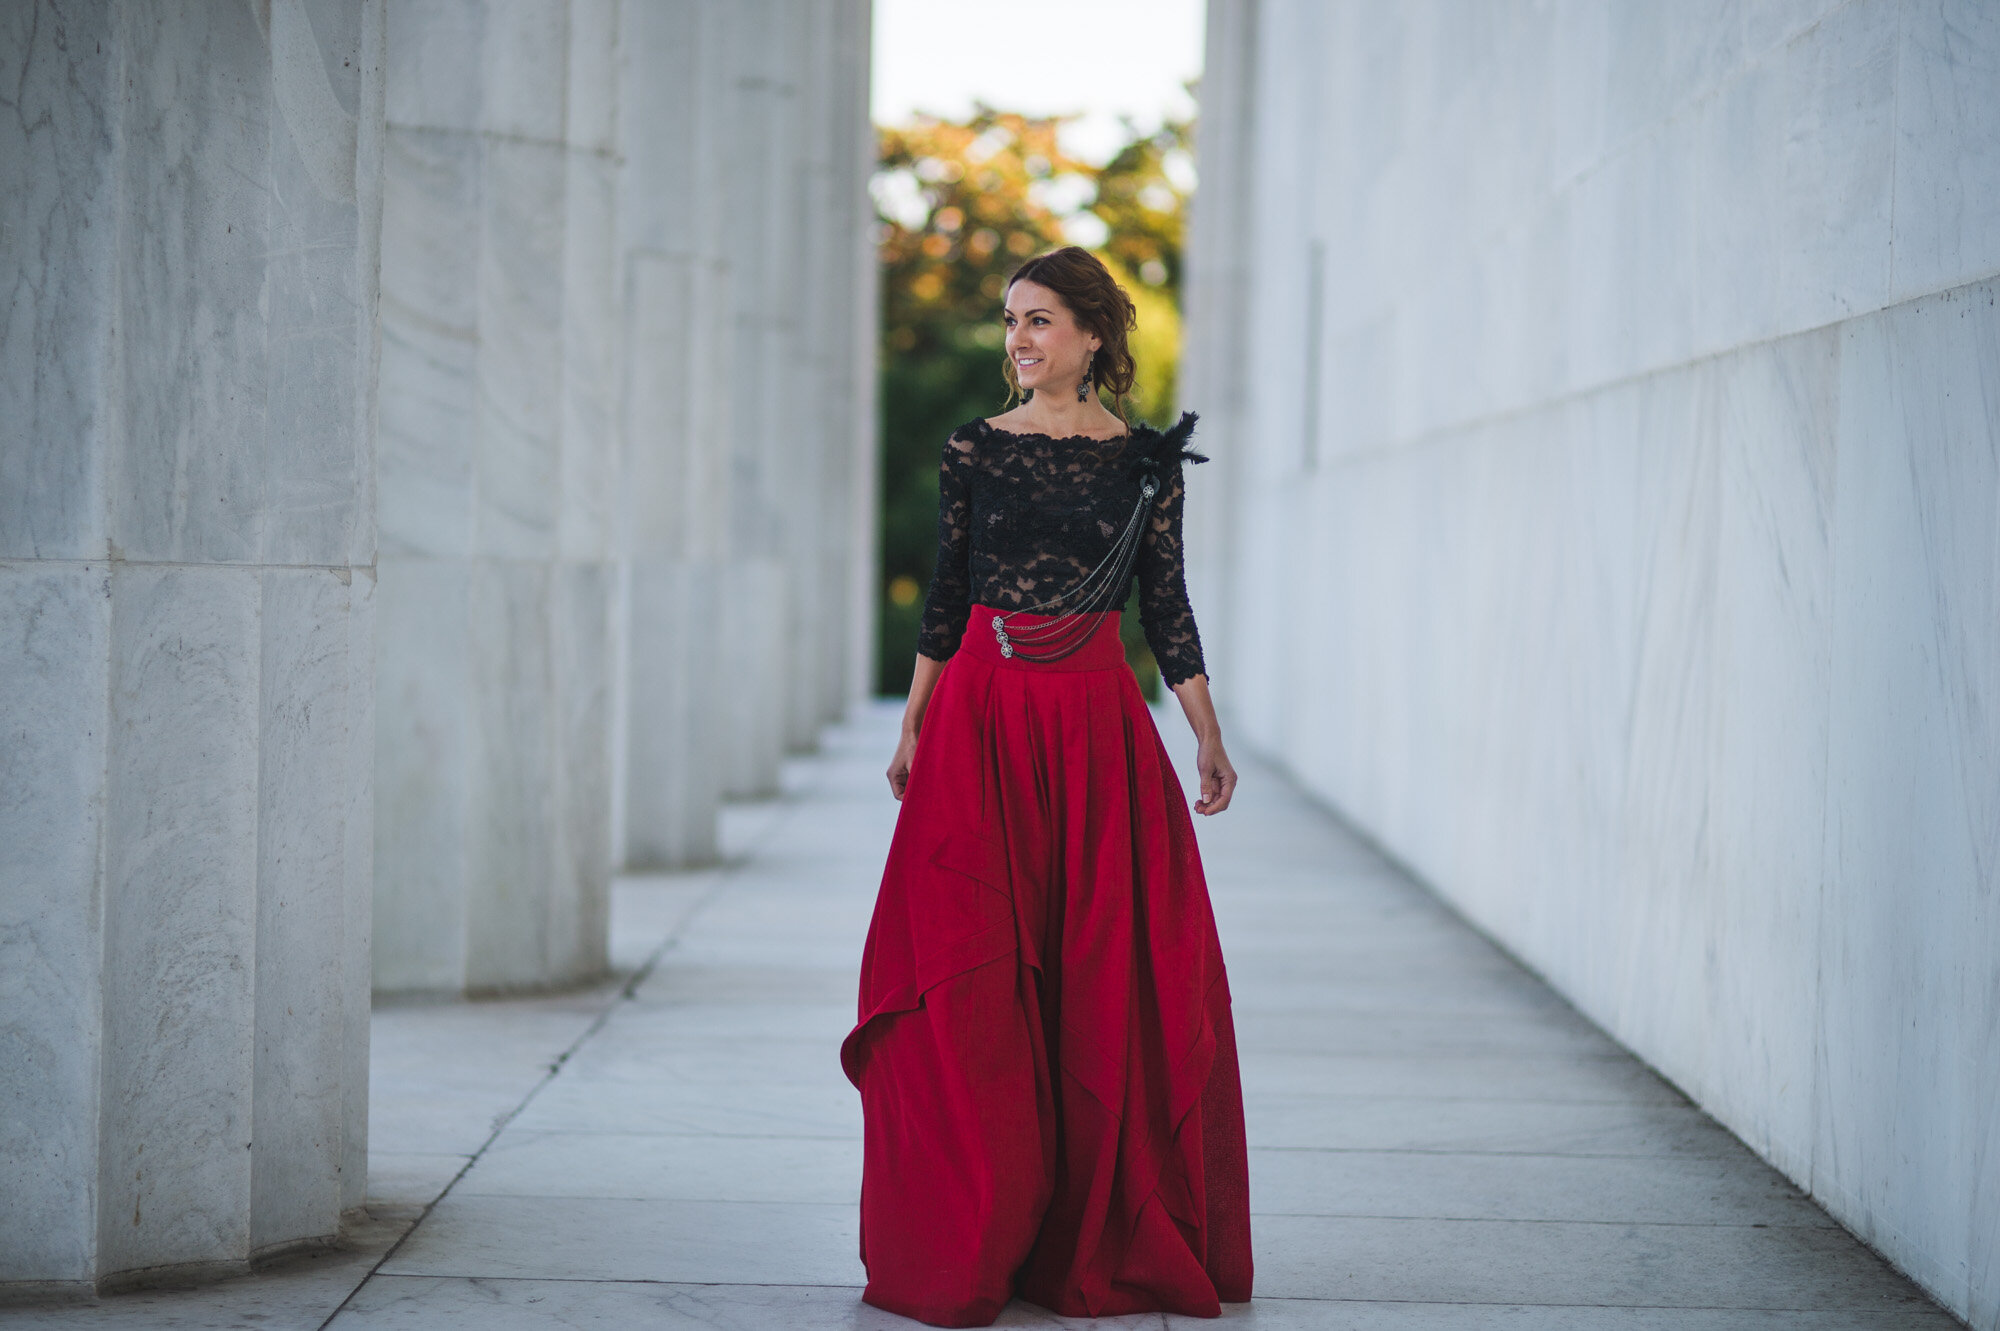 bespoke couture two piece ball gown at Washington Monument designed by Lana Gerimovich with Alis Fashion Design in photographed by Montas Photography.jpg